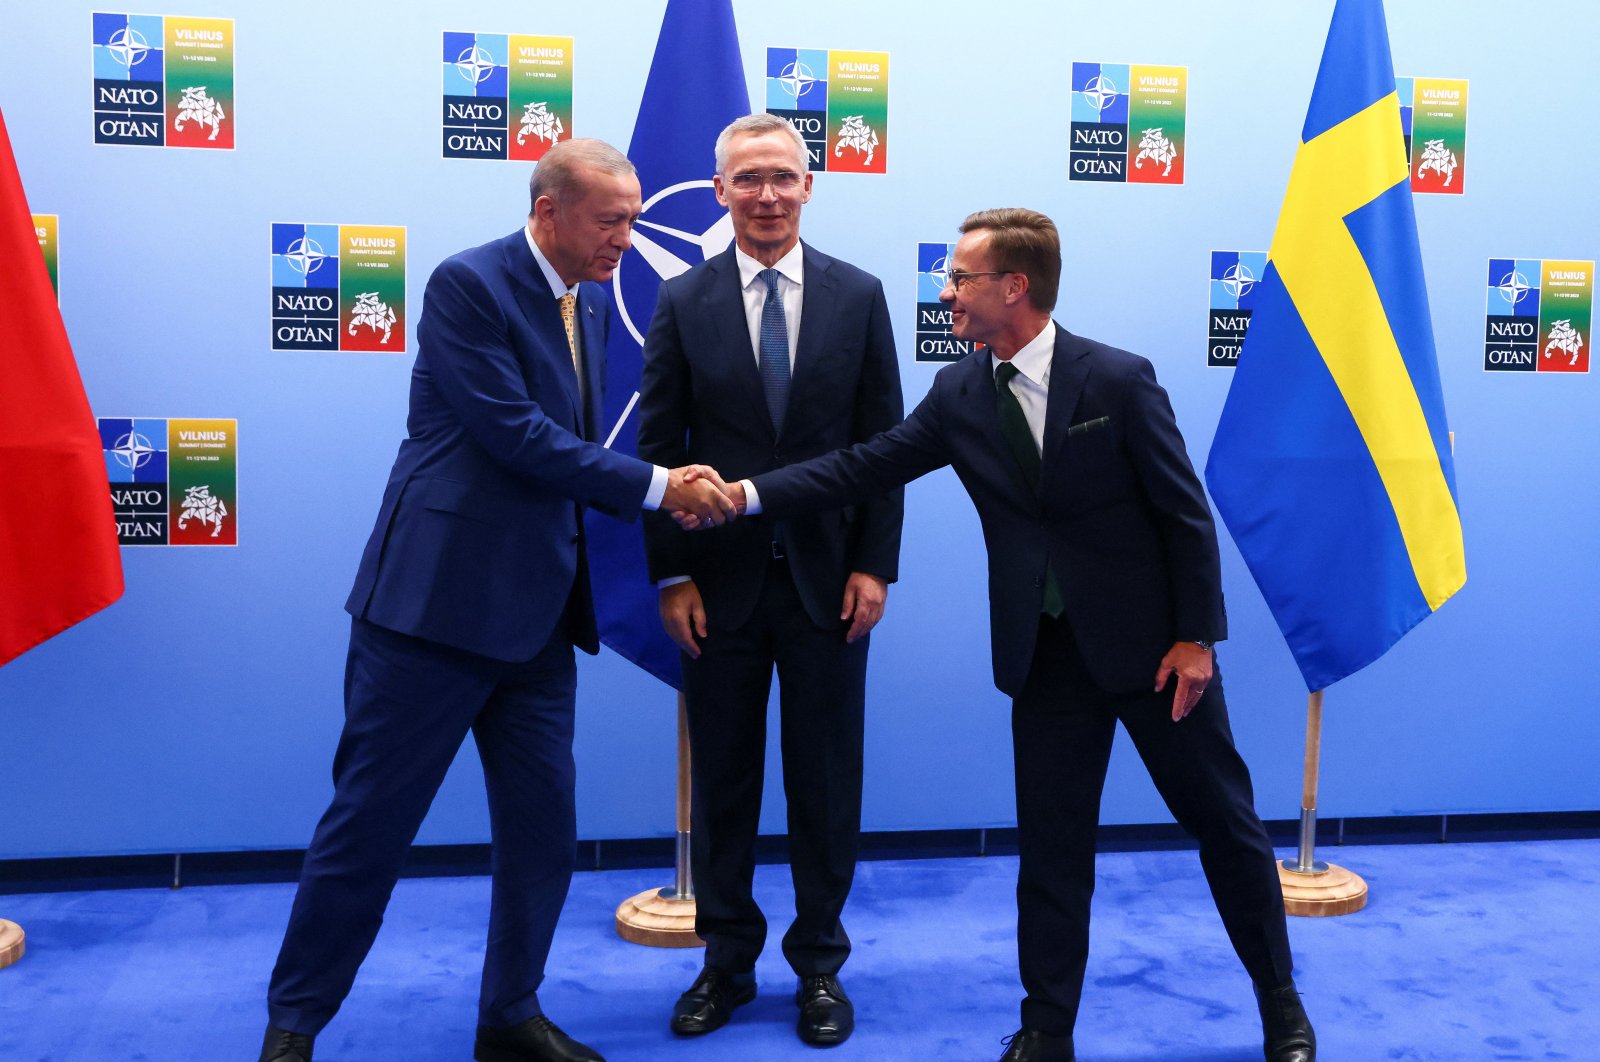 Turkish President Tayyip Erdogan and Swedish Prime Minister Ulf Kristersson shake hands next to  NATO Secretary-General Jens Stoltenberg prior to their meeting, on the eve of a NATO summit, in Vilnius, Lithuania July 10, 2023. (Reuters Photo)